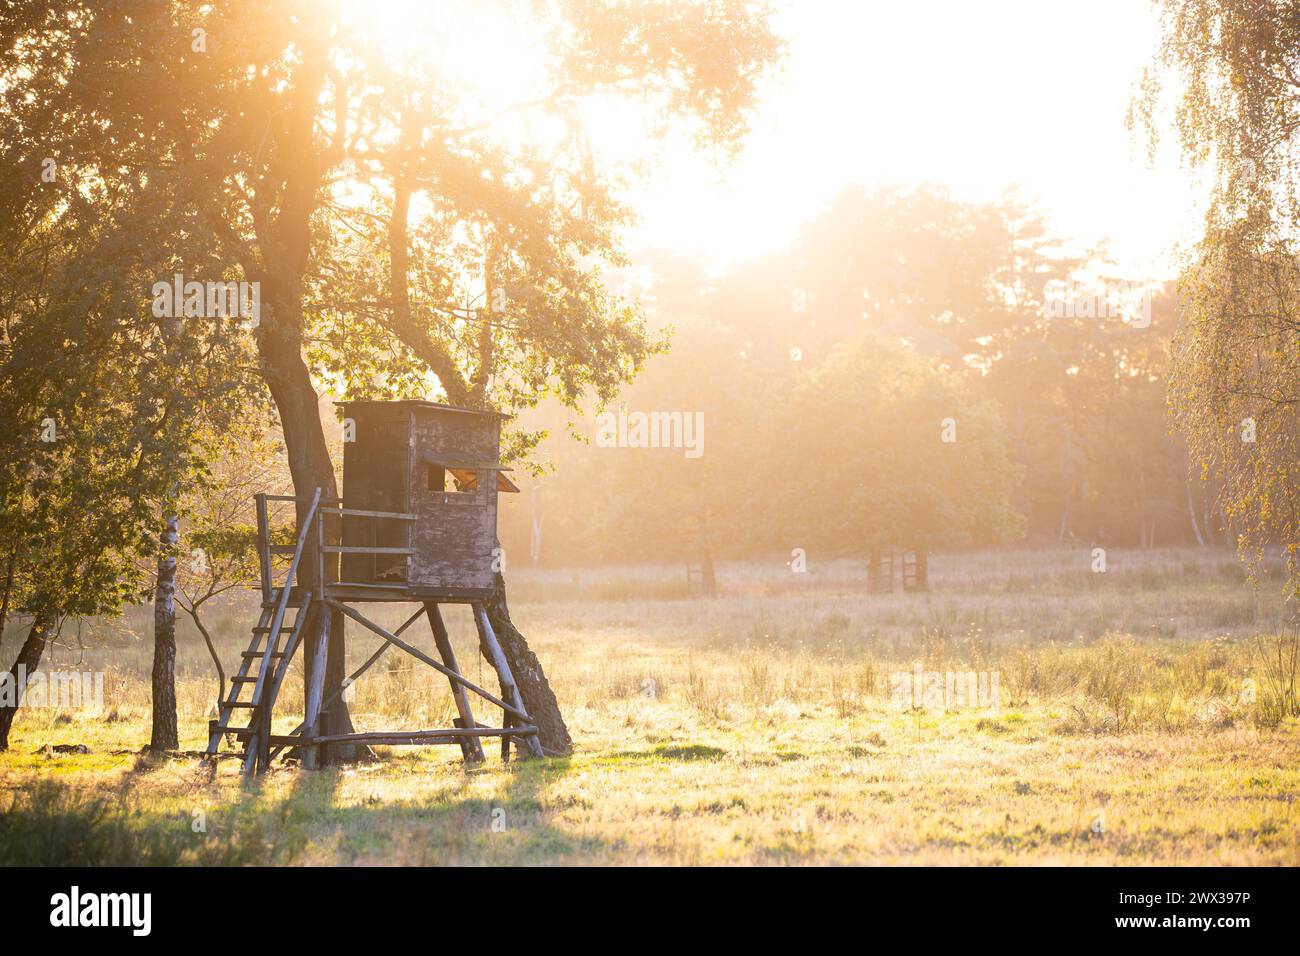 High seat in the light of the evening sun, at the edge of a forest in a meadow, Lower Rhine, Germany Stock Photo